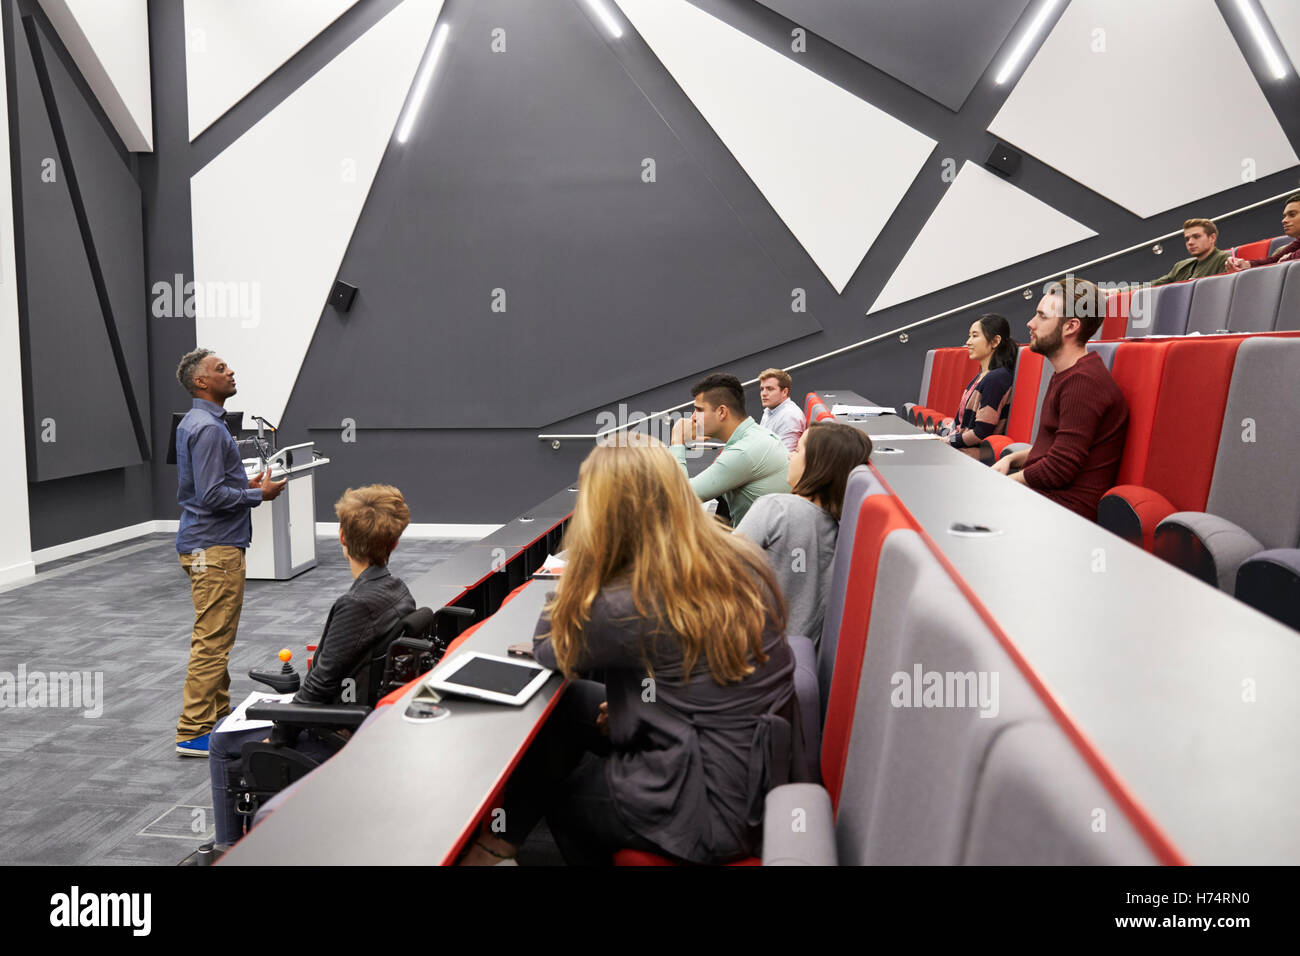 Man lectures students in lecture theatre, front row seat POV Stock Photo